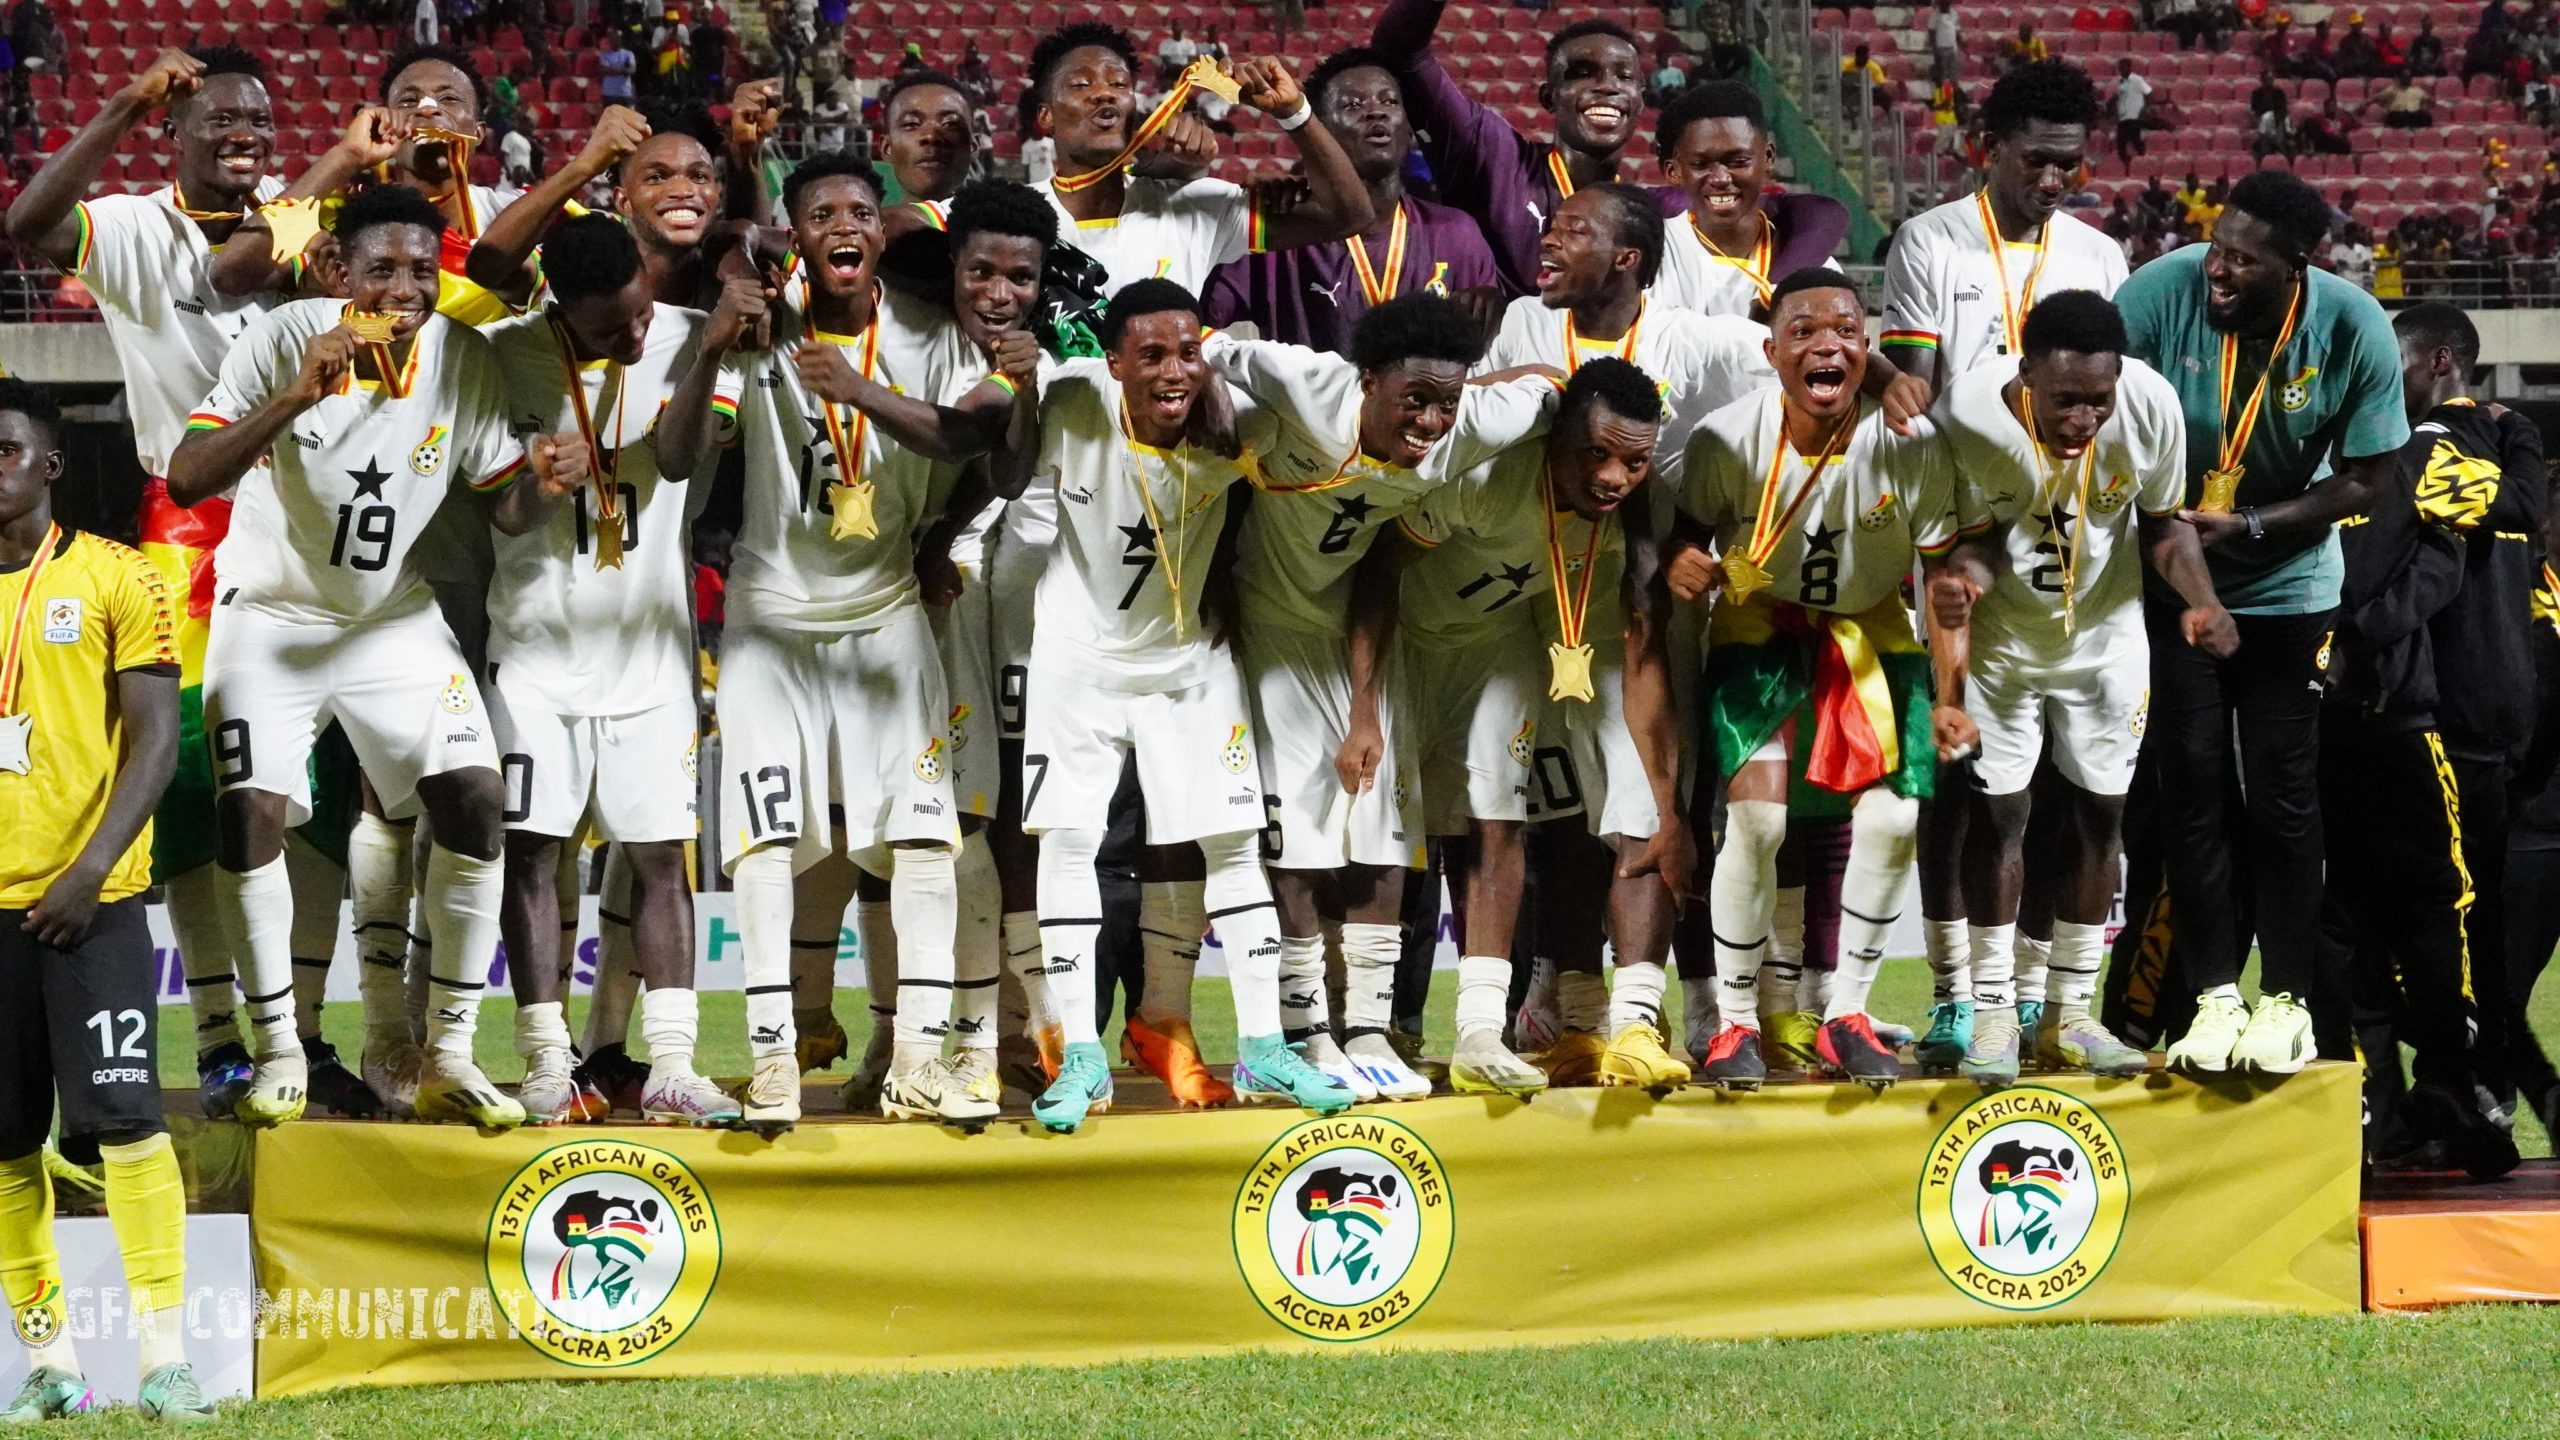 The remarkable Gold Medalists of the 13th All African Games Men's Football Tournament!